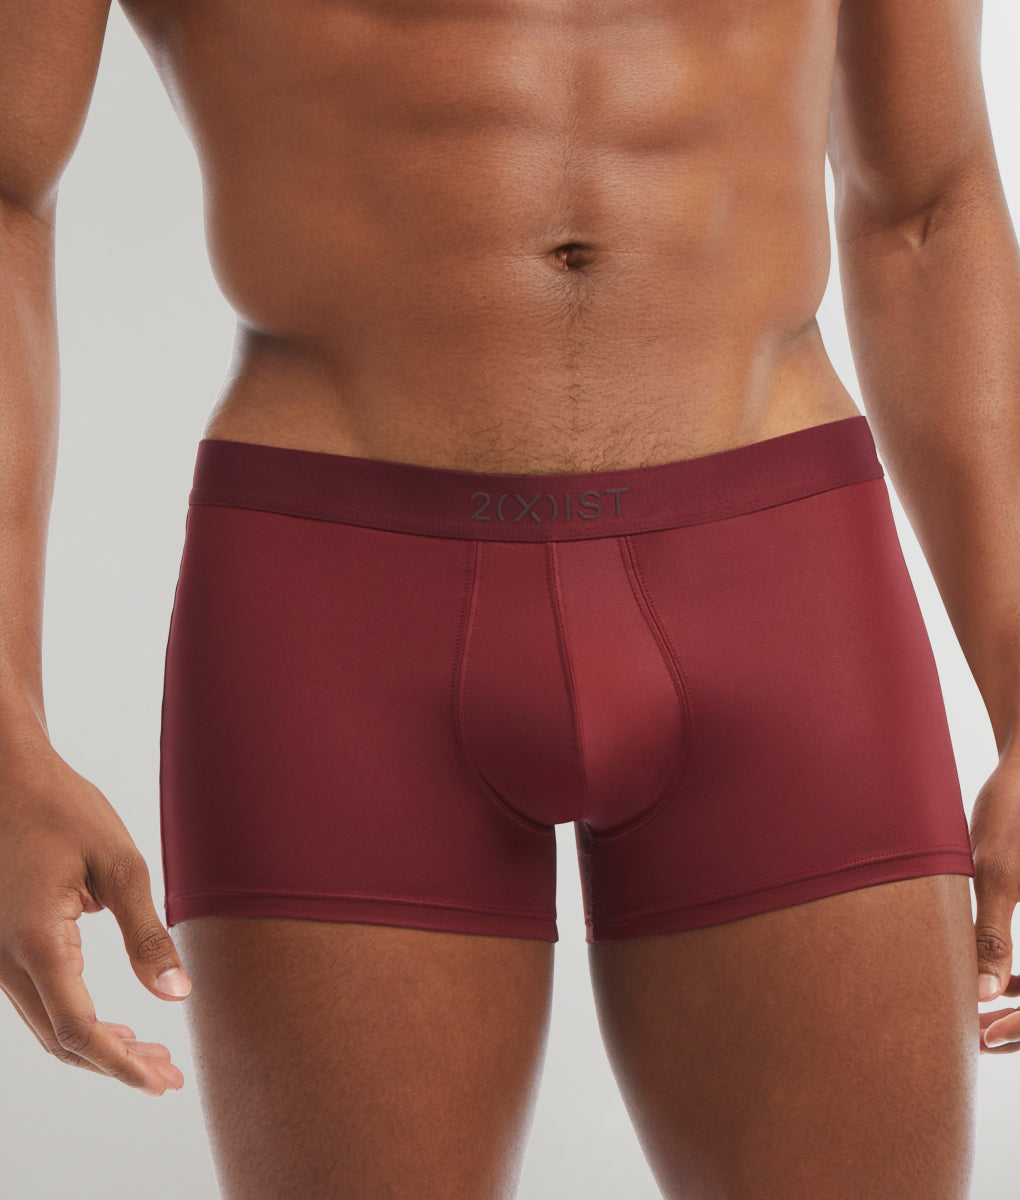 Underwear Expert on X: We're looking at some of our favorite